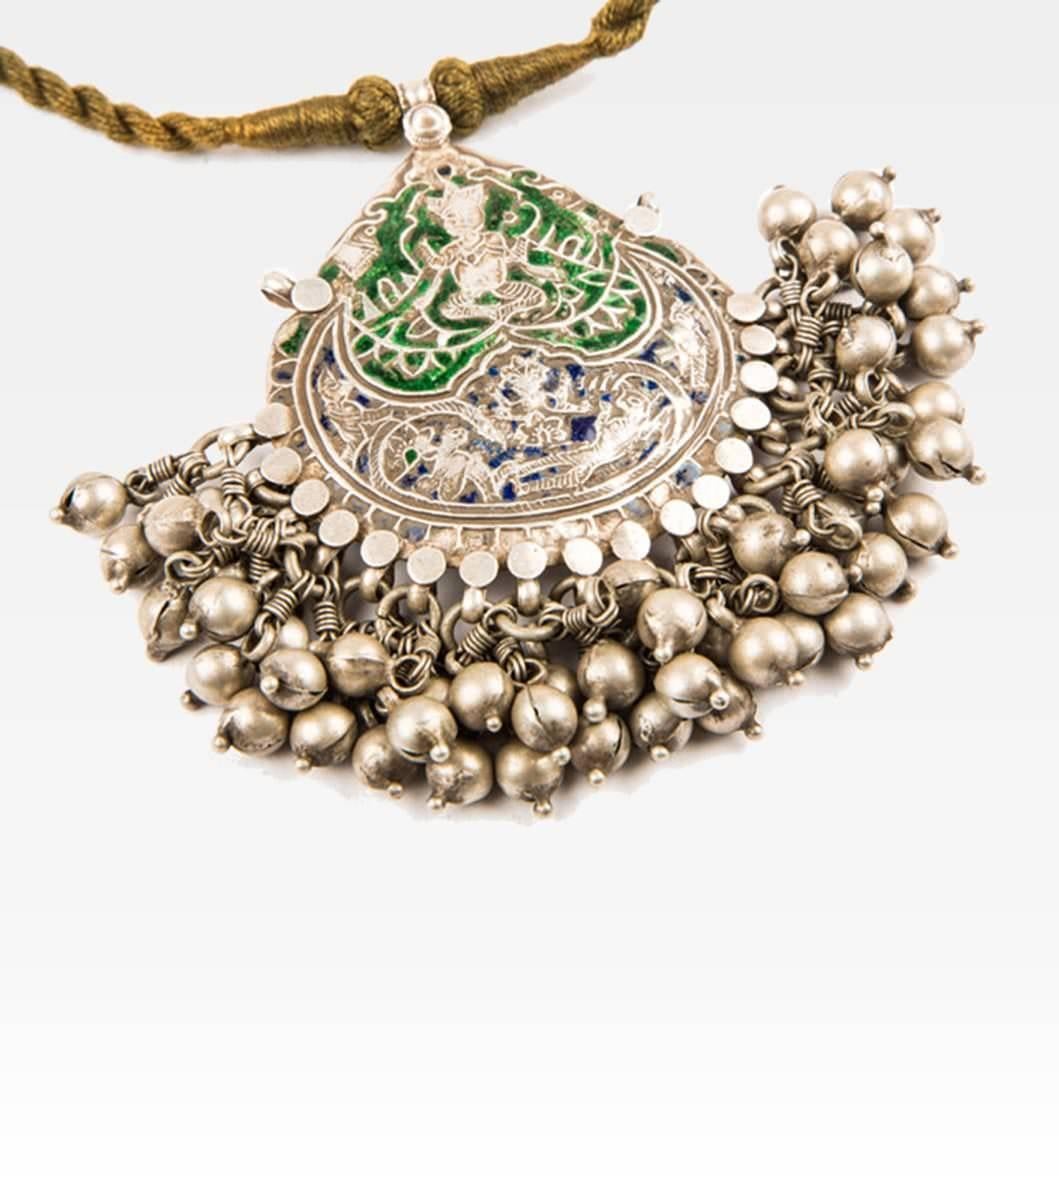 Antique pendant from Himachal Pradesh. The jewel is embossed and depicts Durga, the goddess with multiple arms, the embodiment of the feminine creator energy and owner at the same time of destructive power. The incision is emphasized by green and